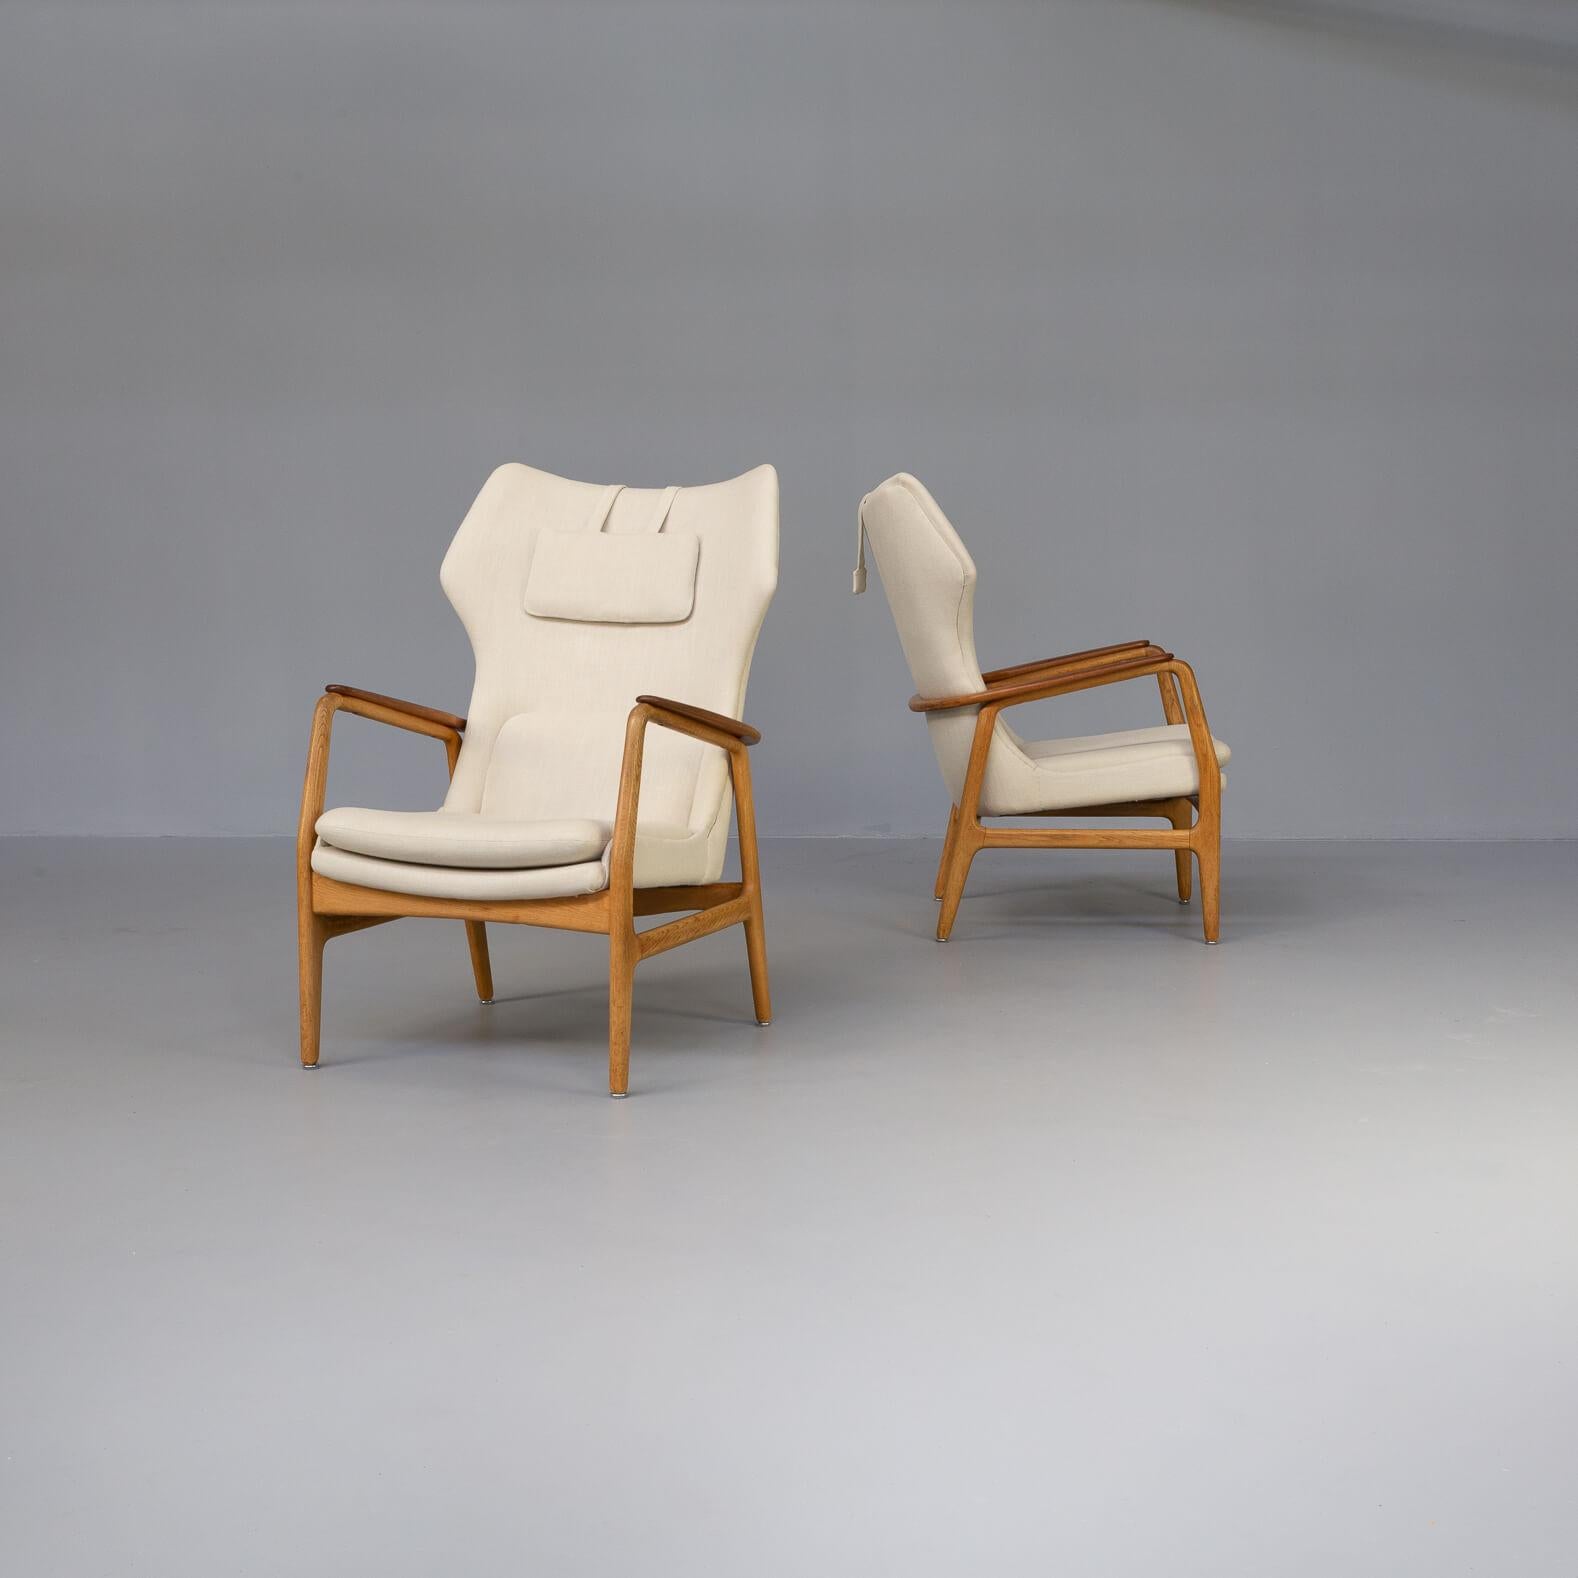 Aksel Bender Madsen introduced a clear Danish aesthetic to the Dutch brand Bovenkamp in the 1950s and 1960s, who also worked with Arne Vodder. Bender Madsen designs for Bovenkamp feature many models of easy chairs and armchairs, including the